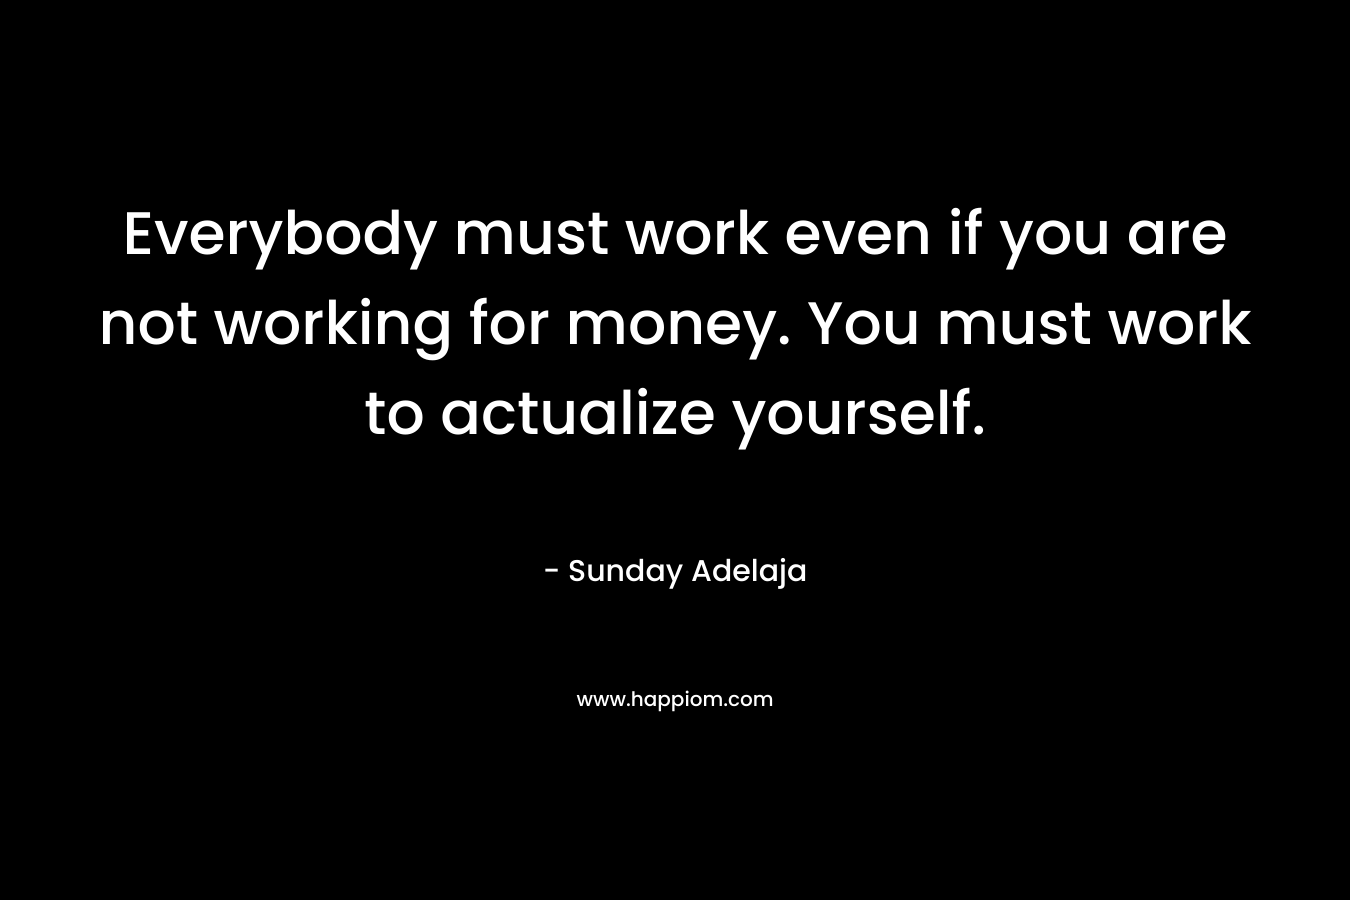 Everybody must work even if you are not working for money. You must work to actualize yourself.